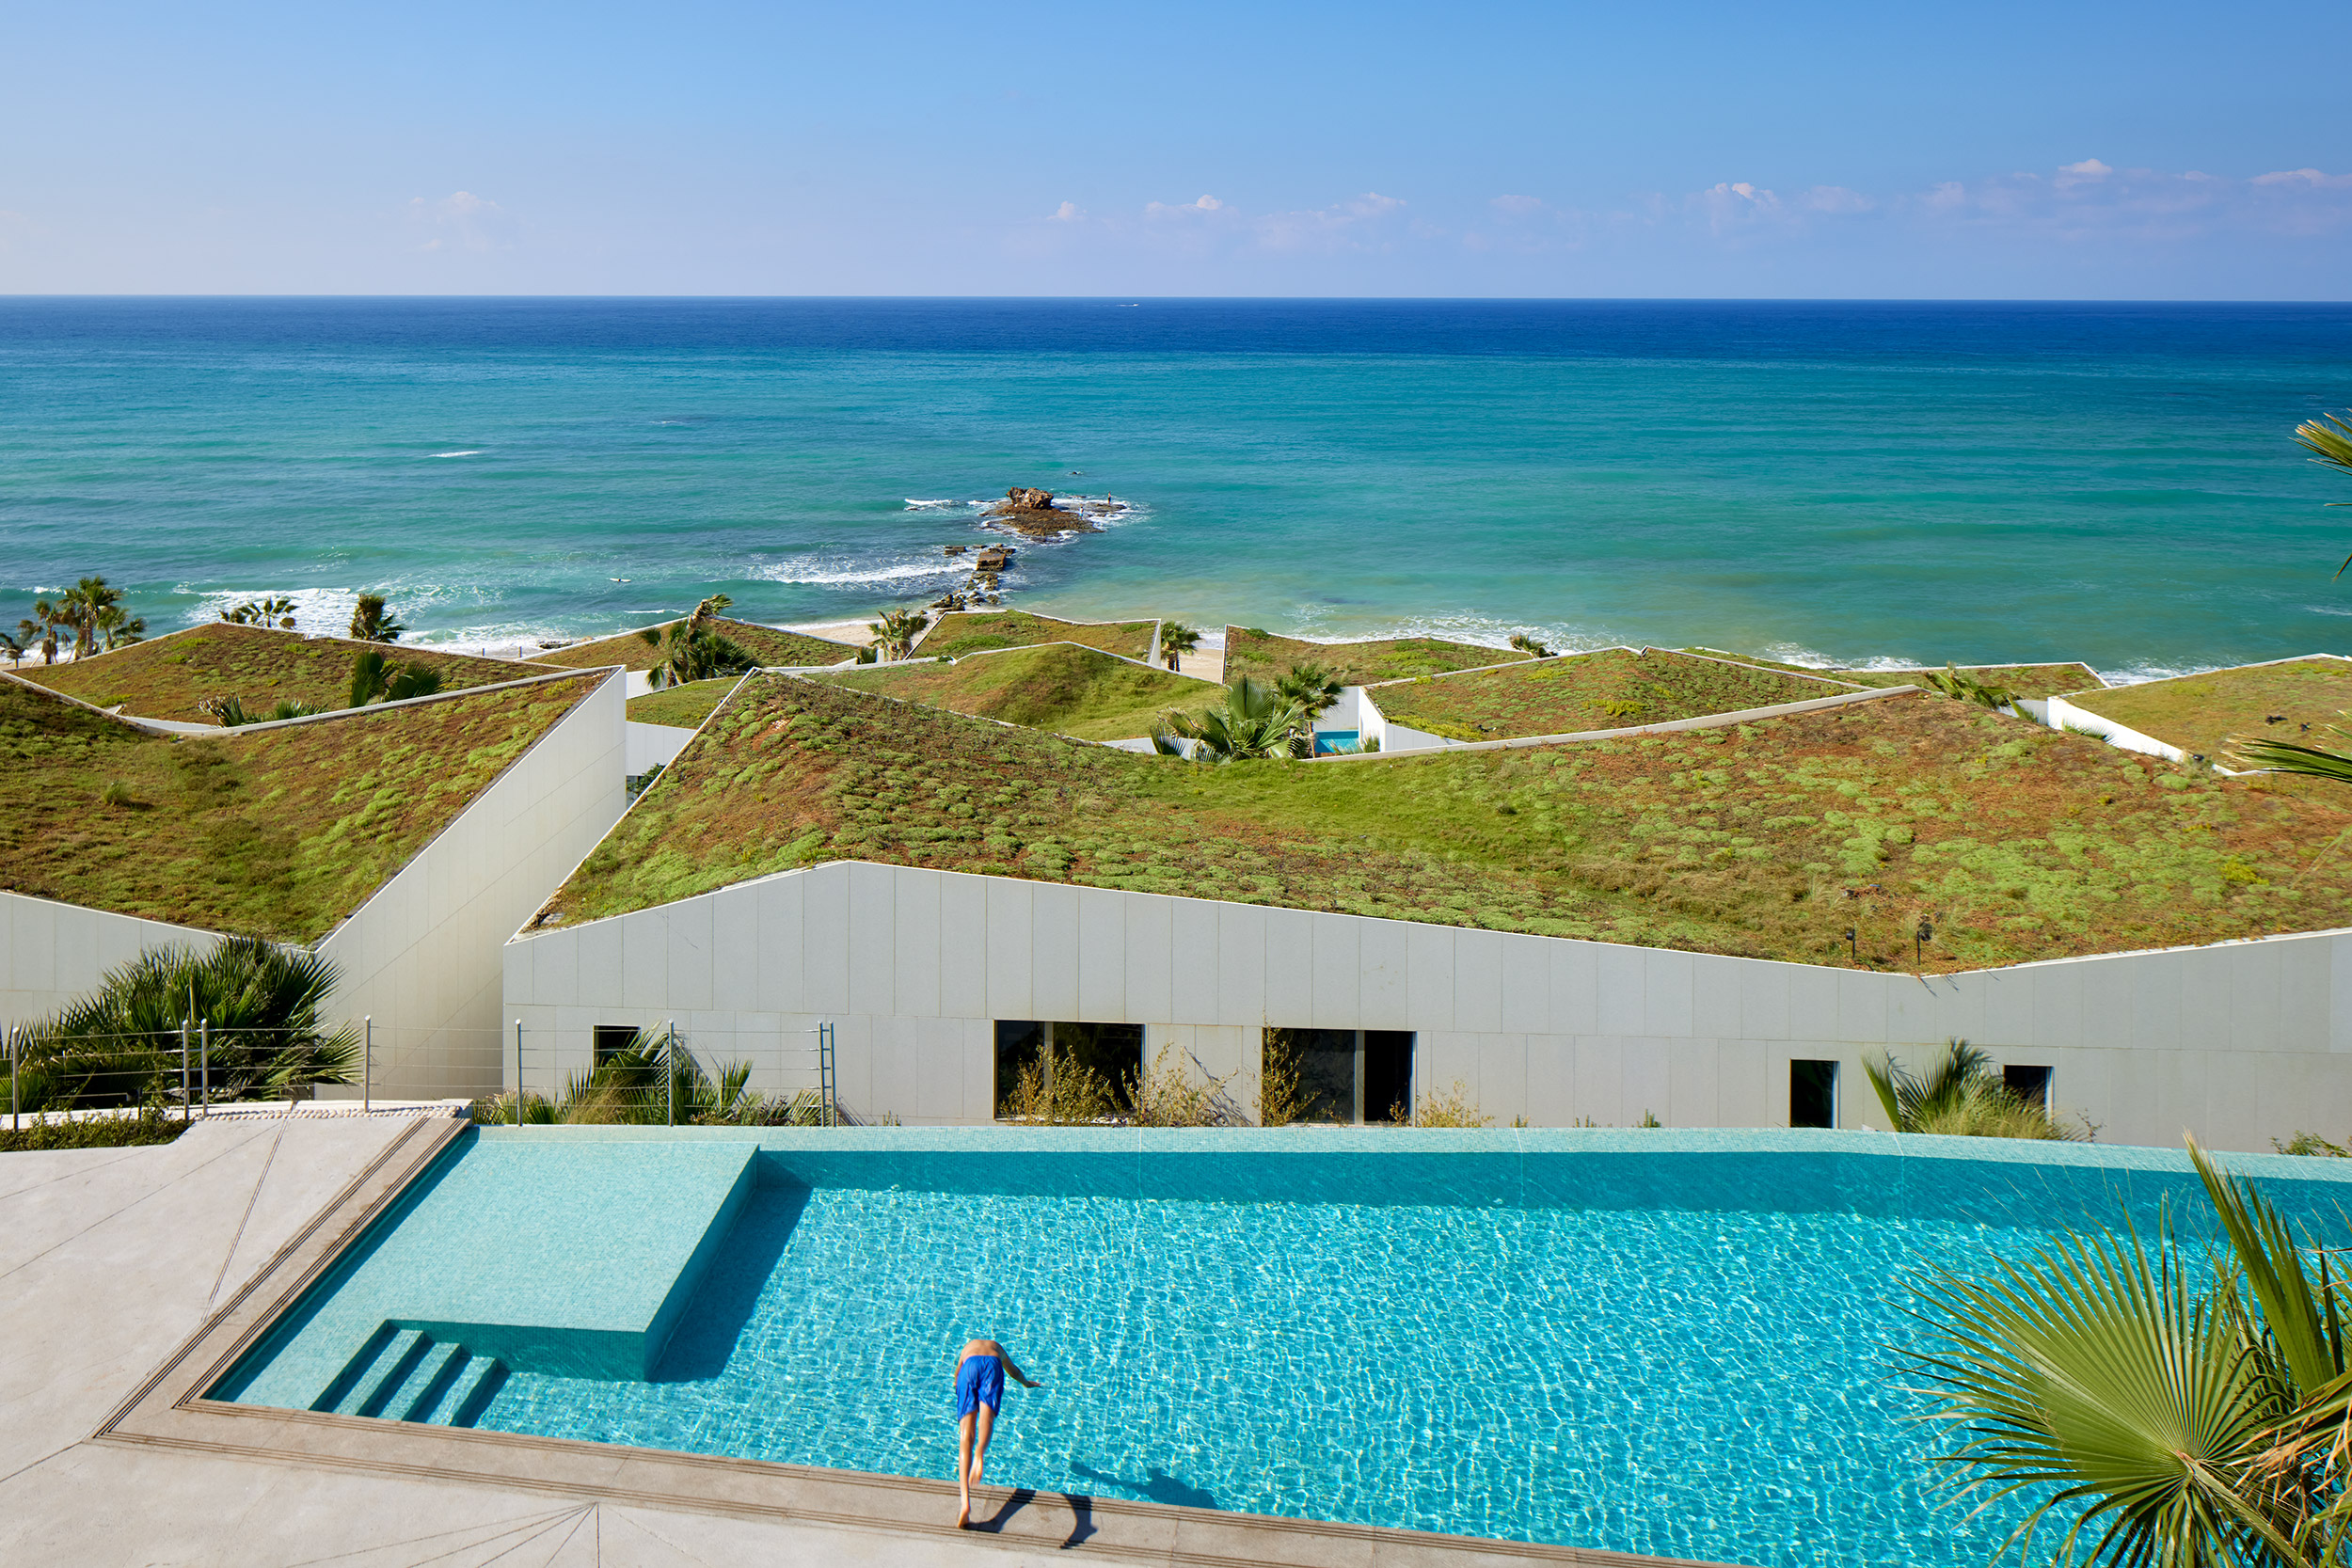 The exterior of the Marea housing development in Lebanon with a swimming pool in the foreground and the ocean in the background